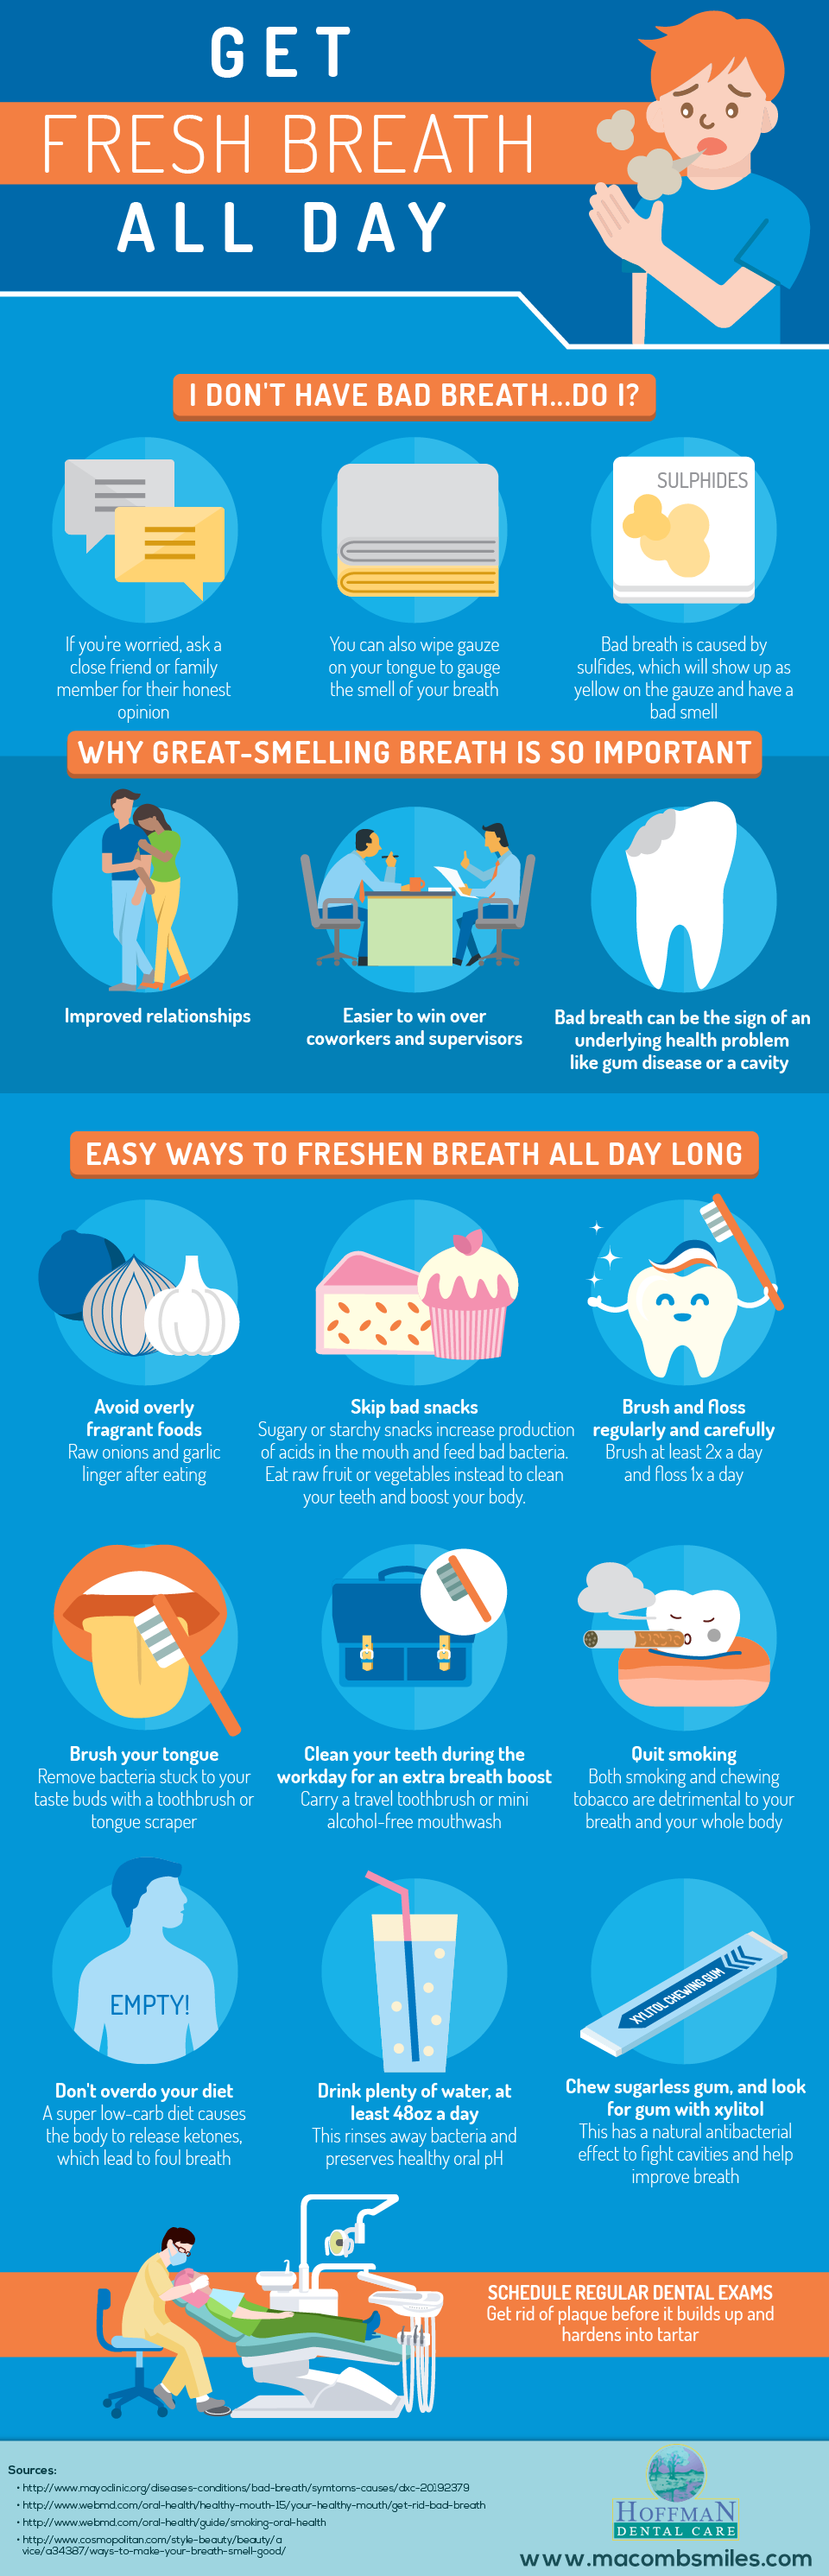 Diagnose and Fix Bad Breath Today | Hoffman Dental Care